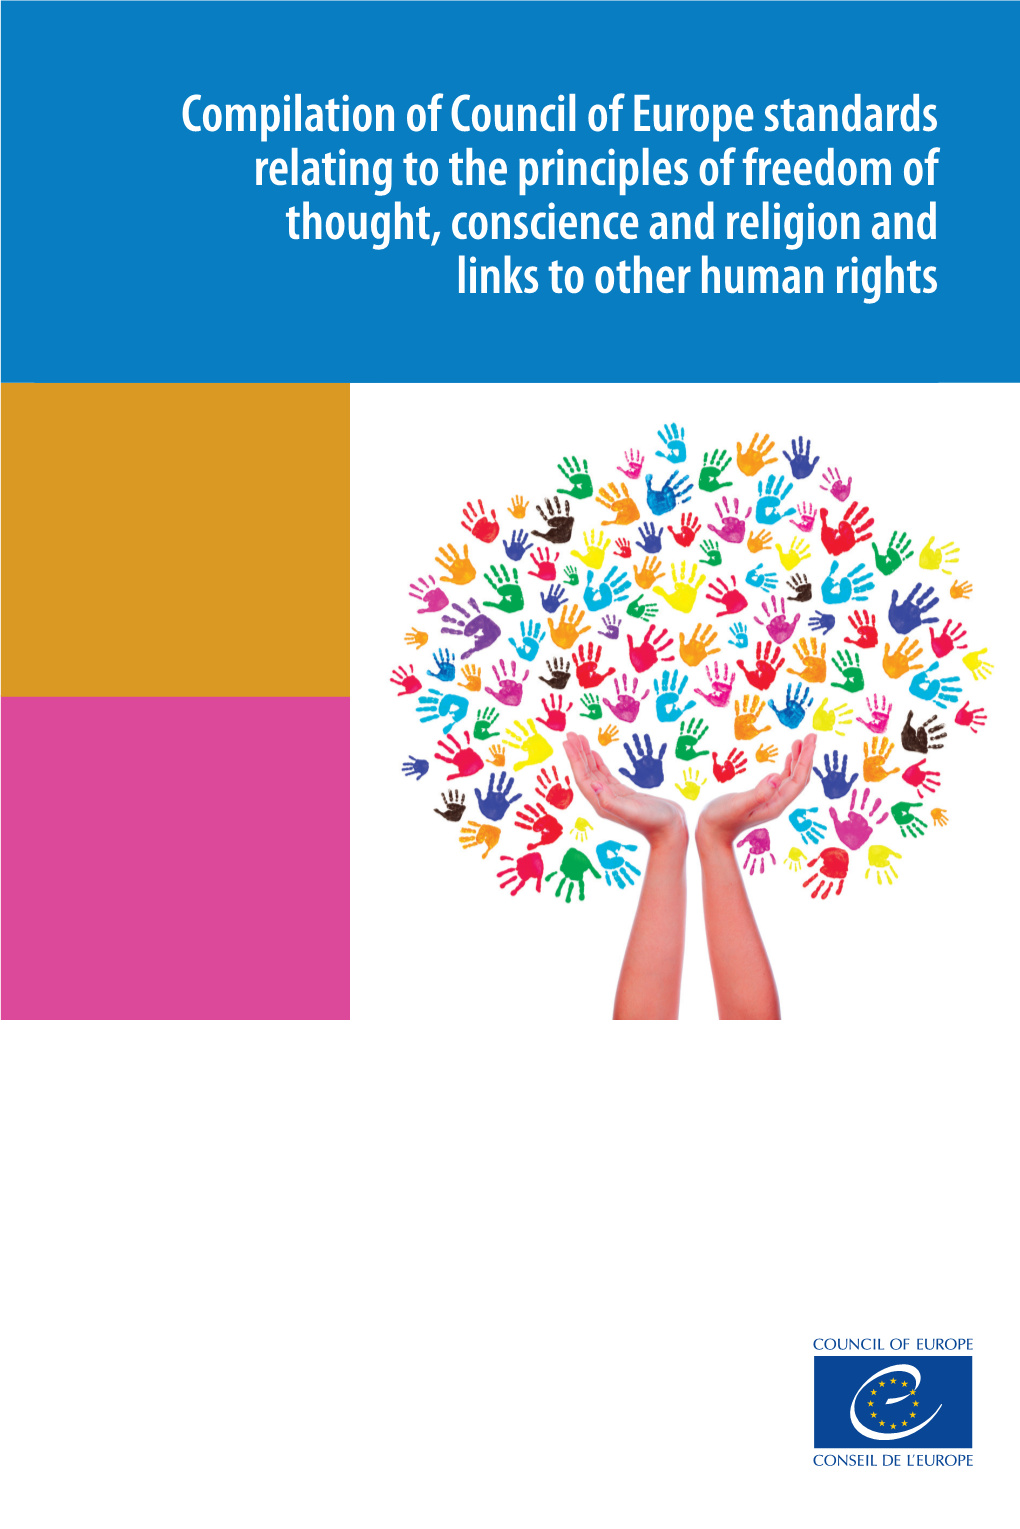 Compilation of Council of Europe Standards Relating to the Principles of Freedom of Thought, Conscience and Religion and Links to Other Human Rights